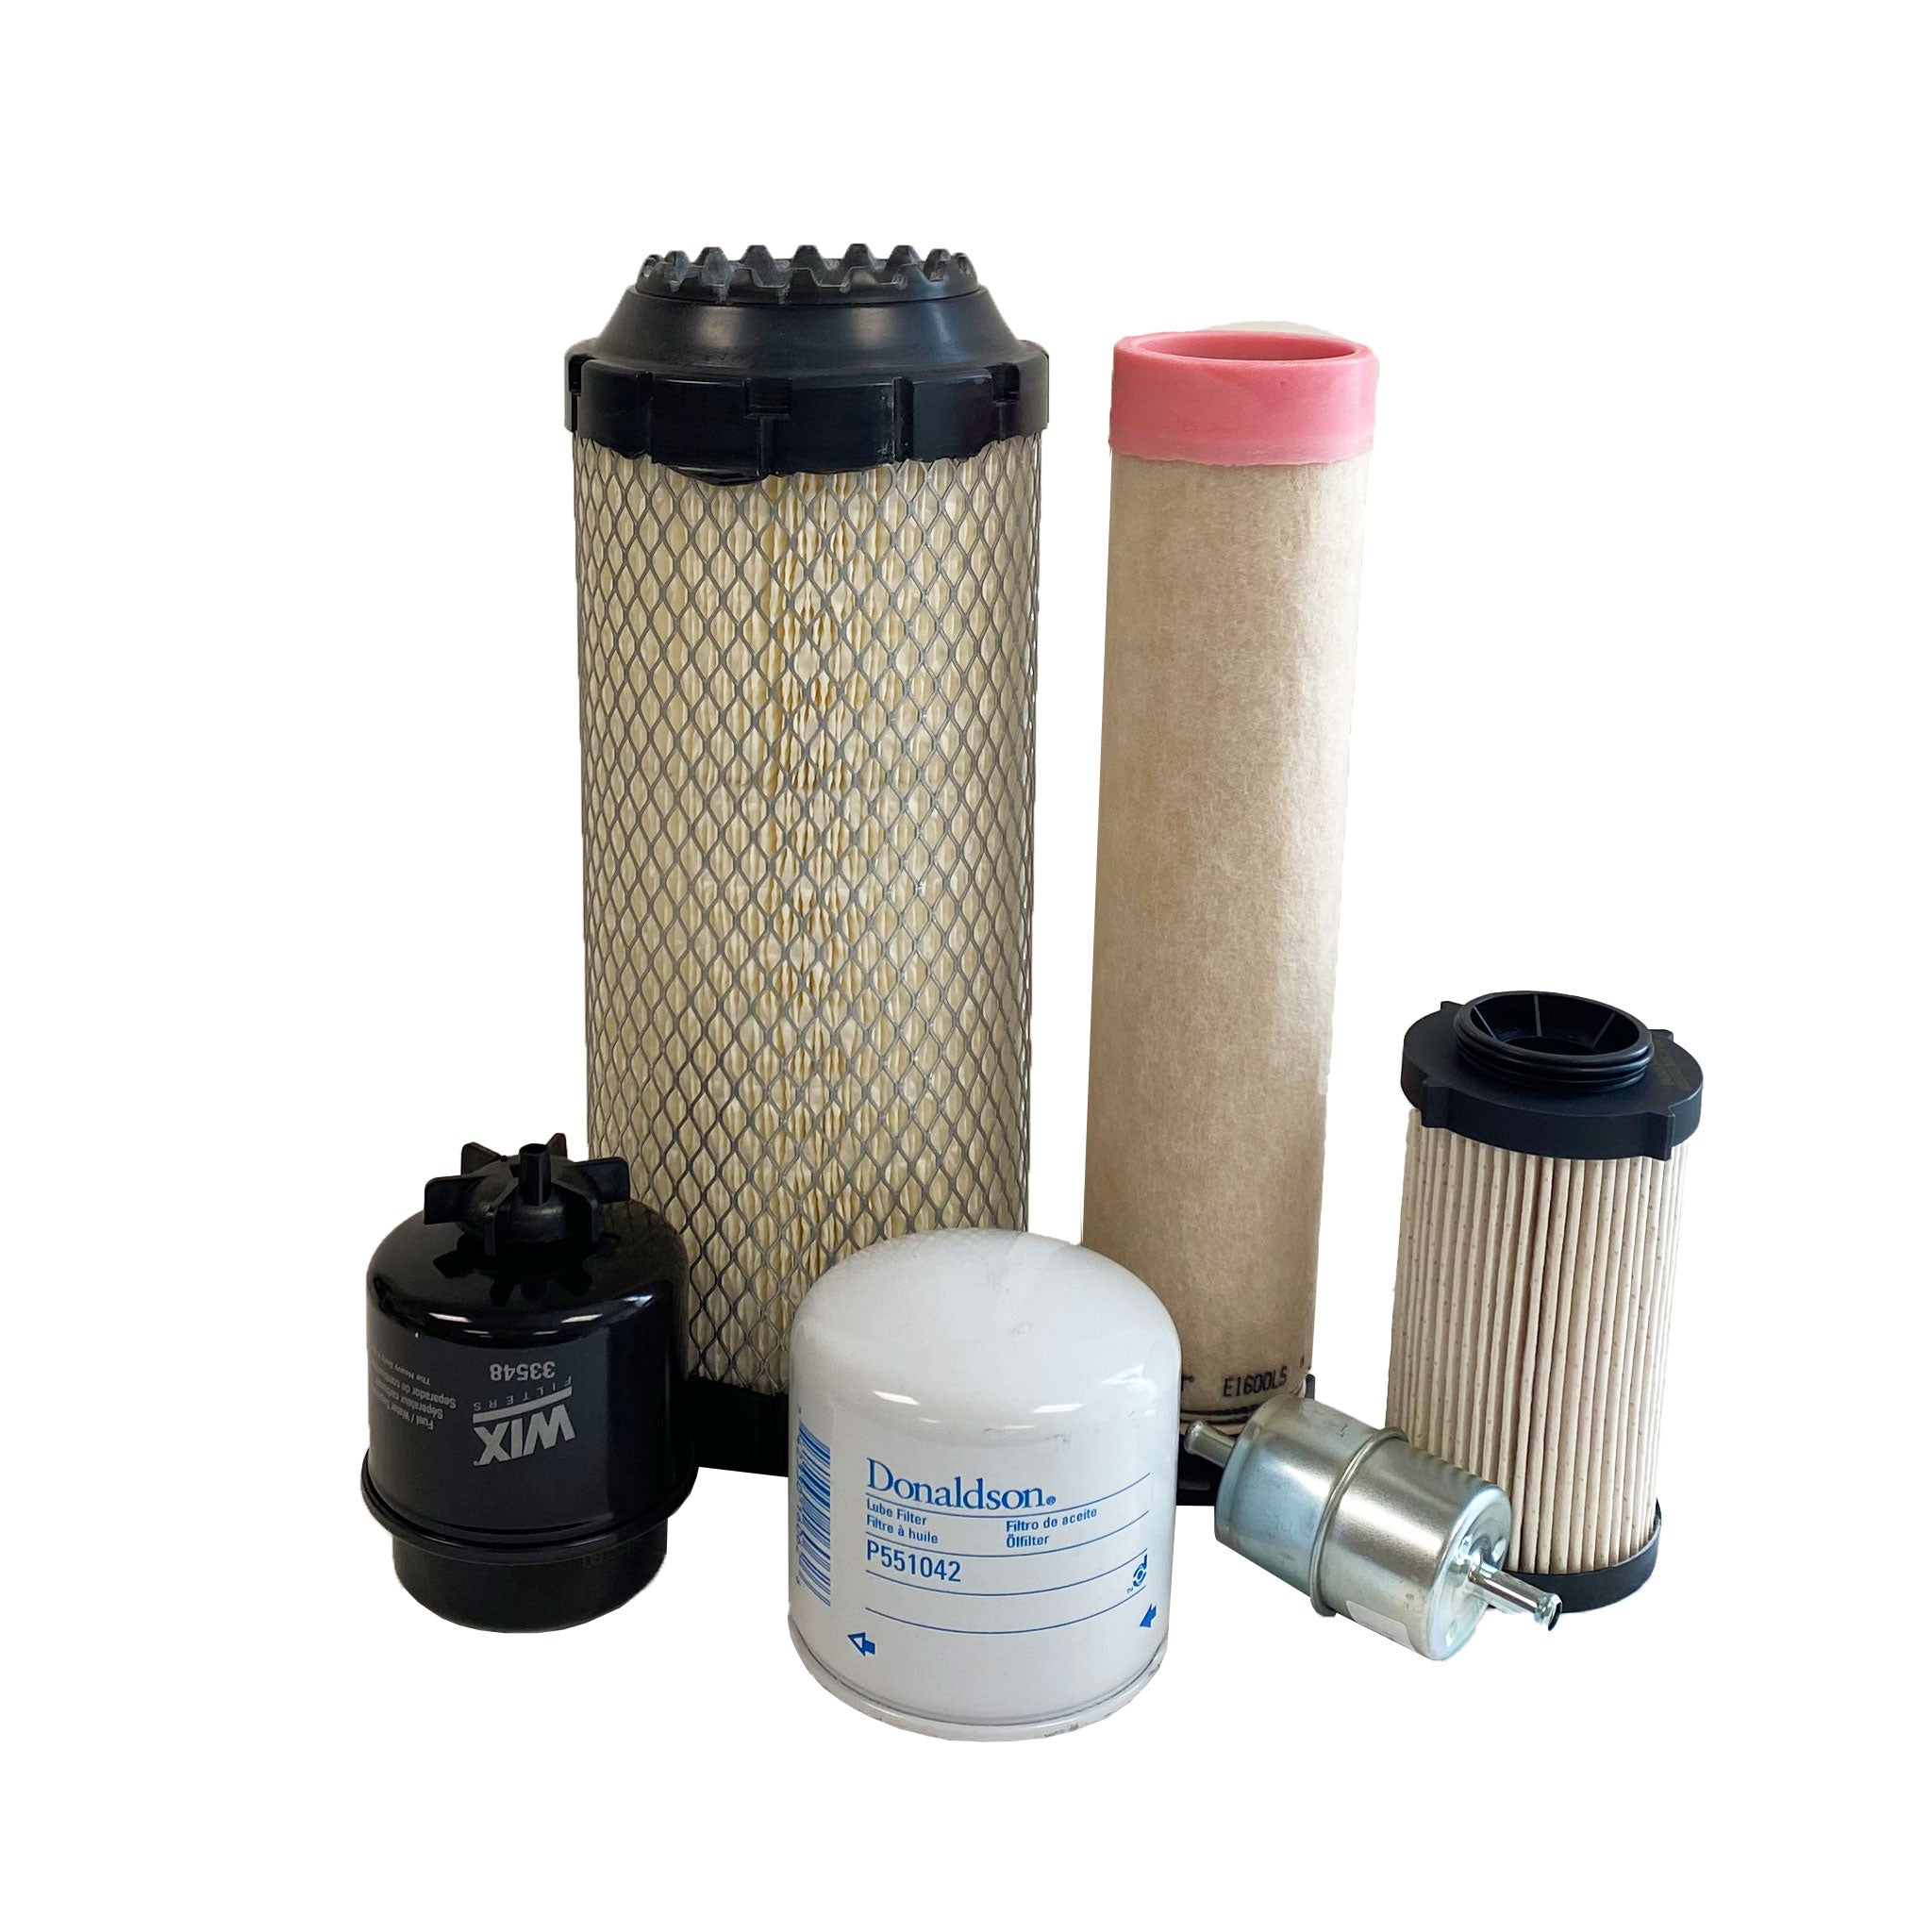 CFKIT Filter Service Kit Compatible with C A T 304E2 CR, 305E2